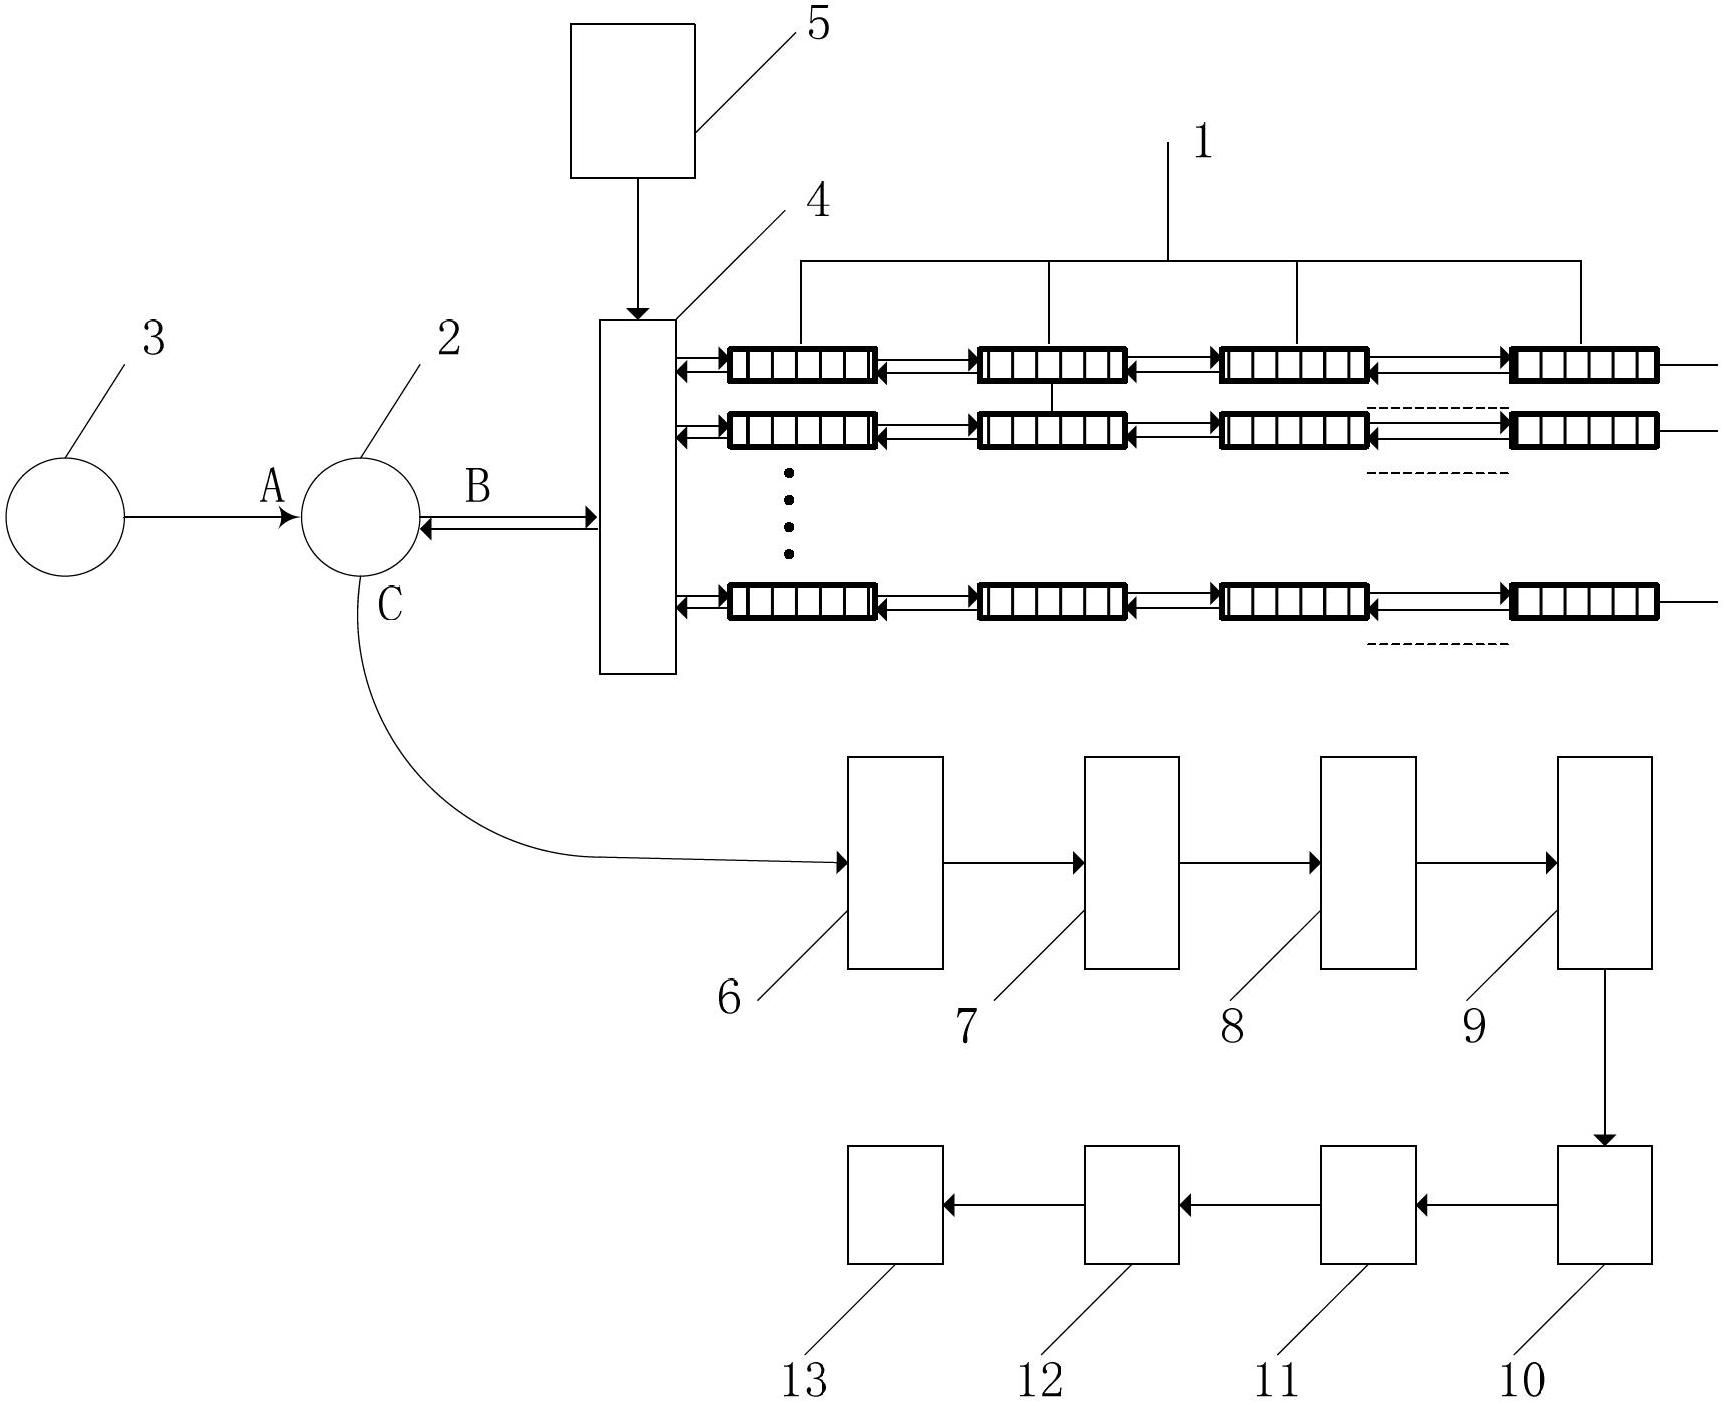 Fiber grating temperature sensing system for detecting temperatures of inflammables and explosives